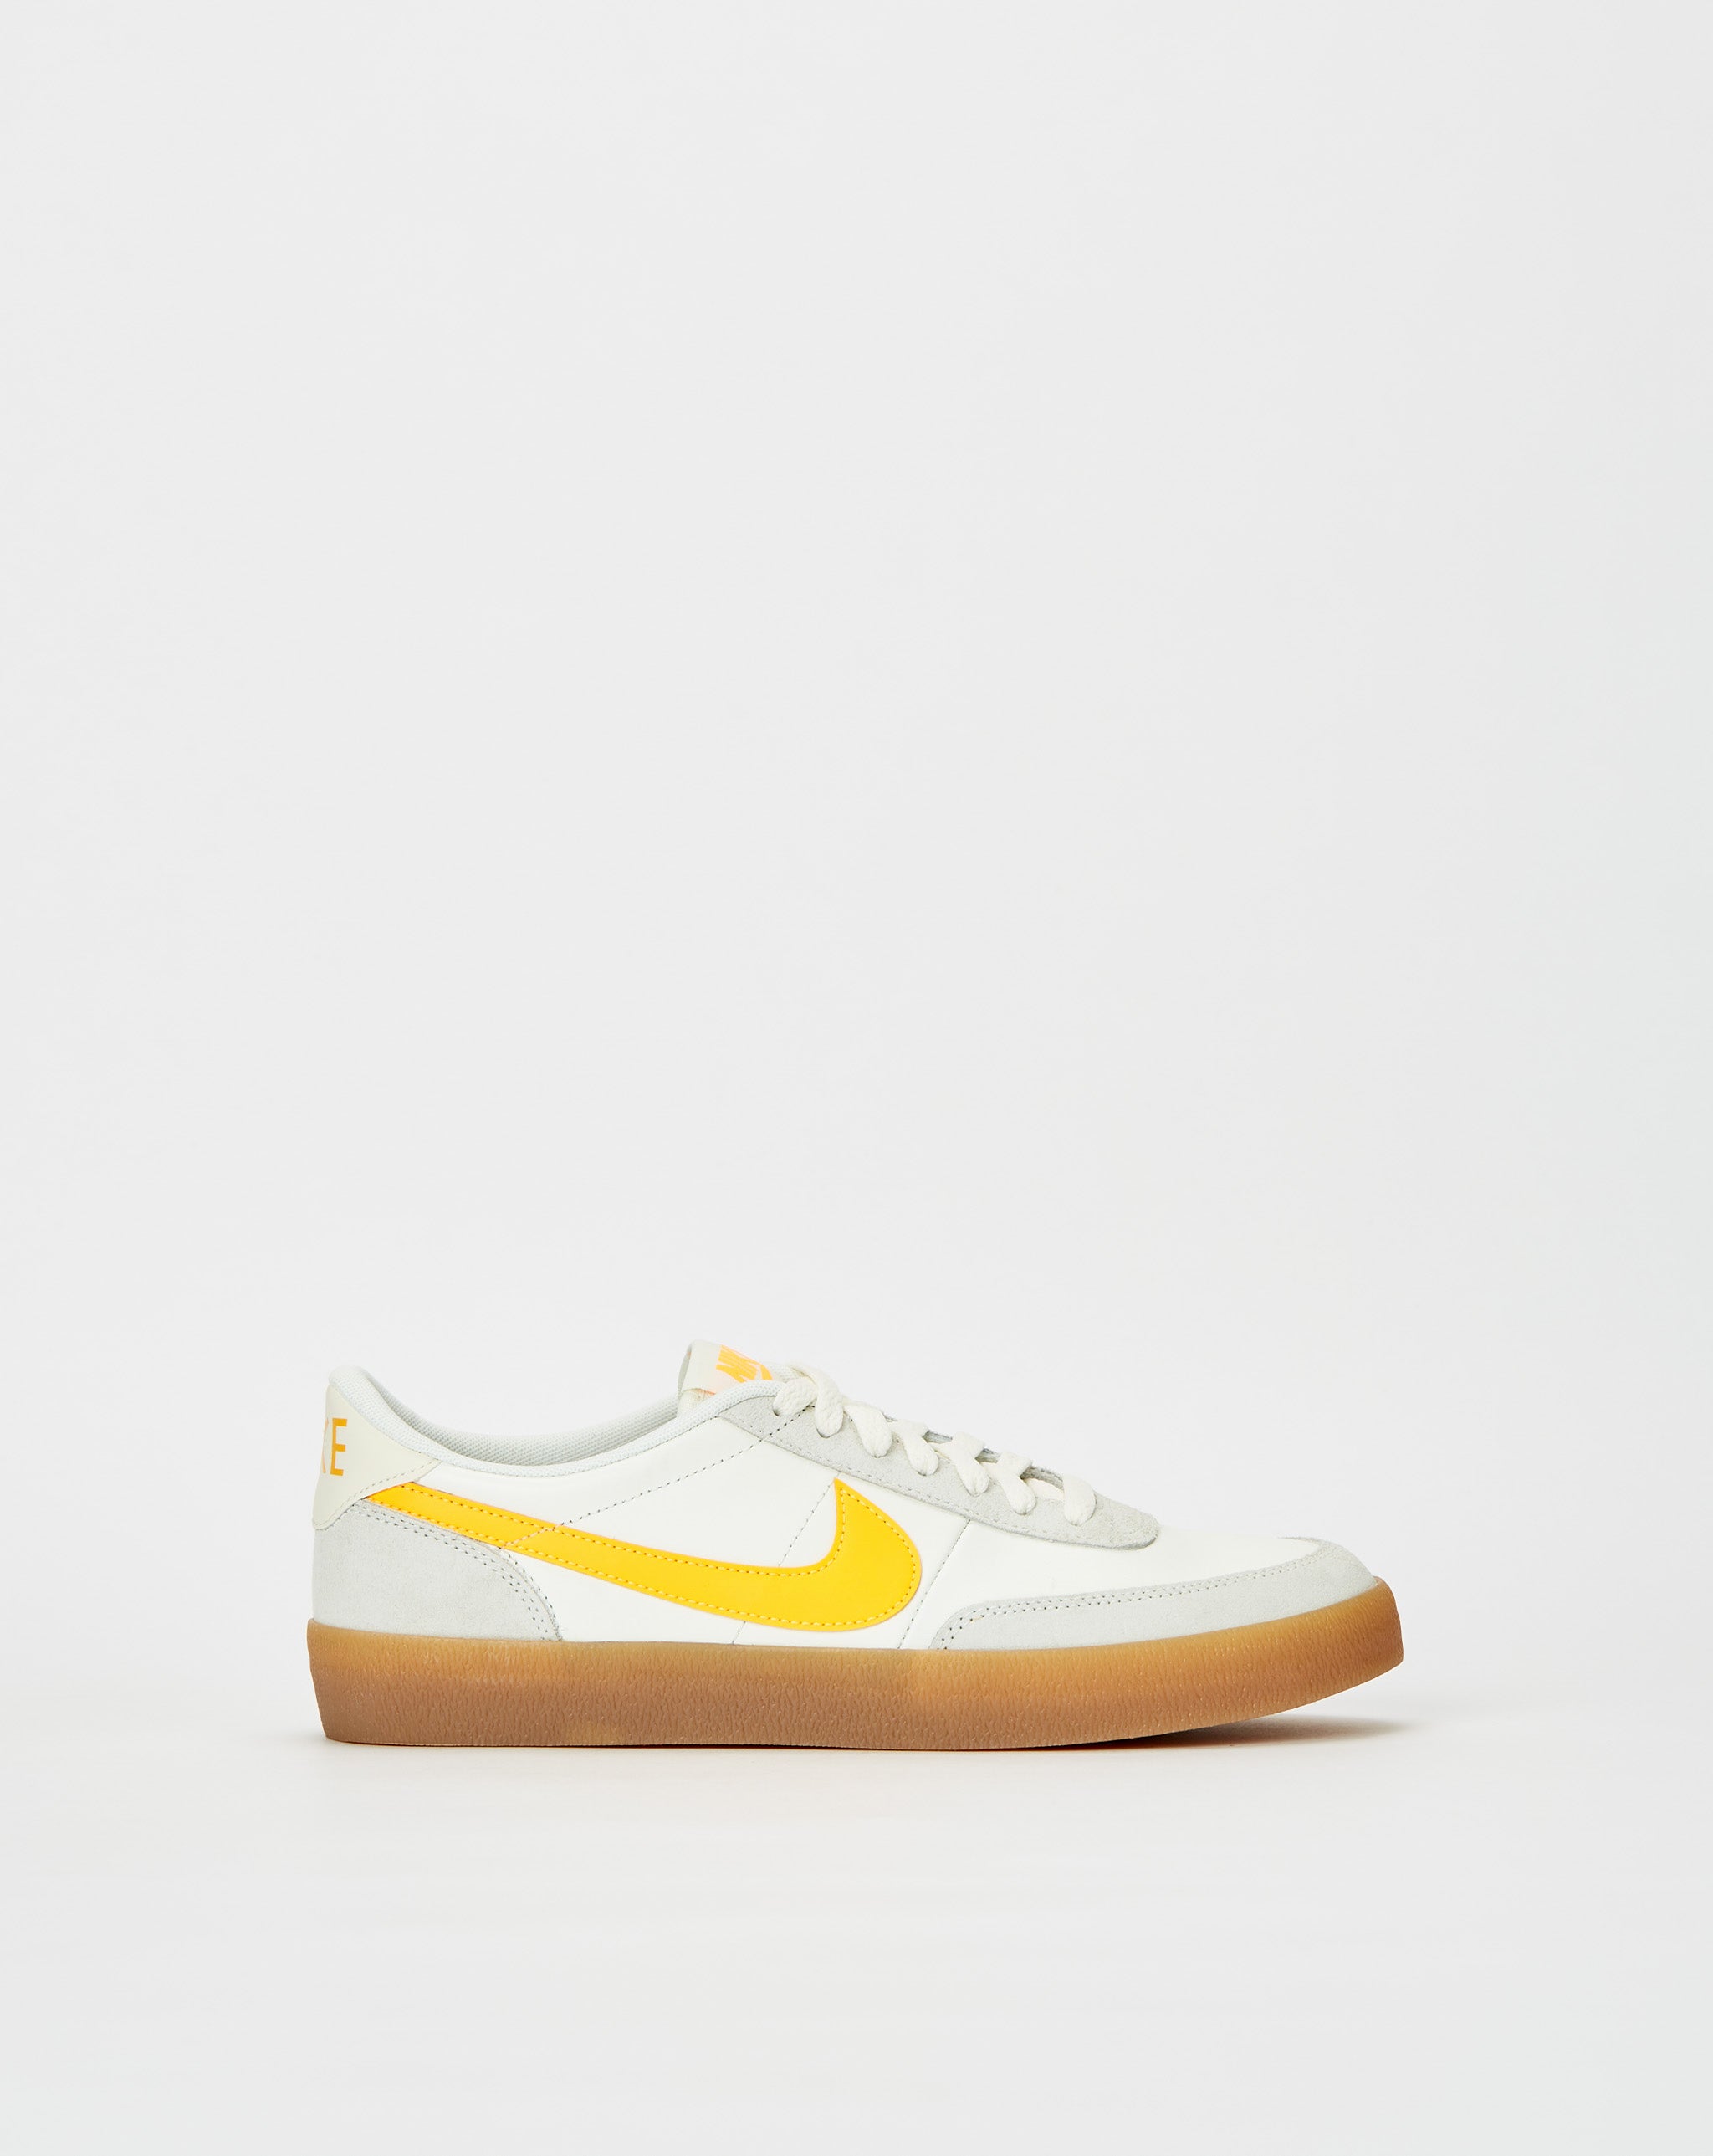 shoes similar to nike cortez sneakers